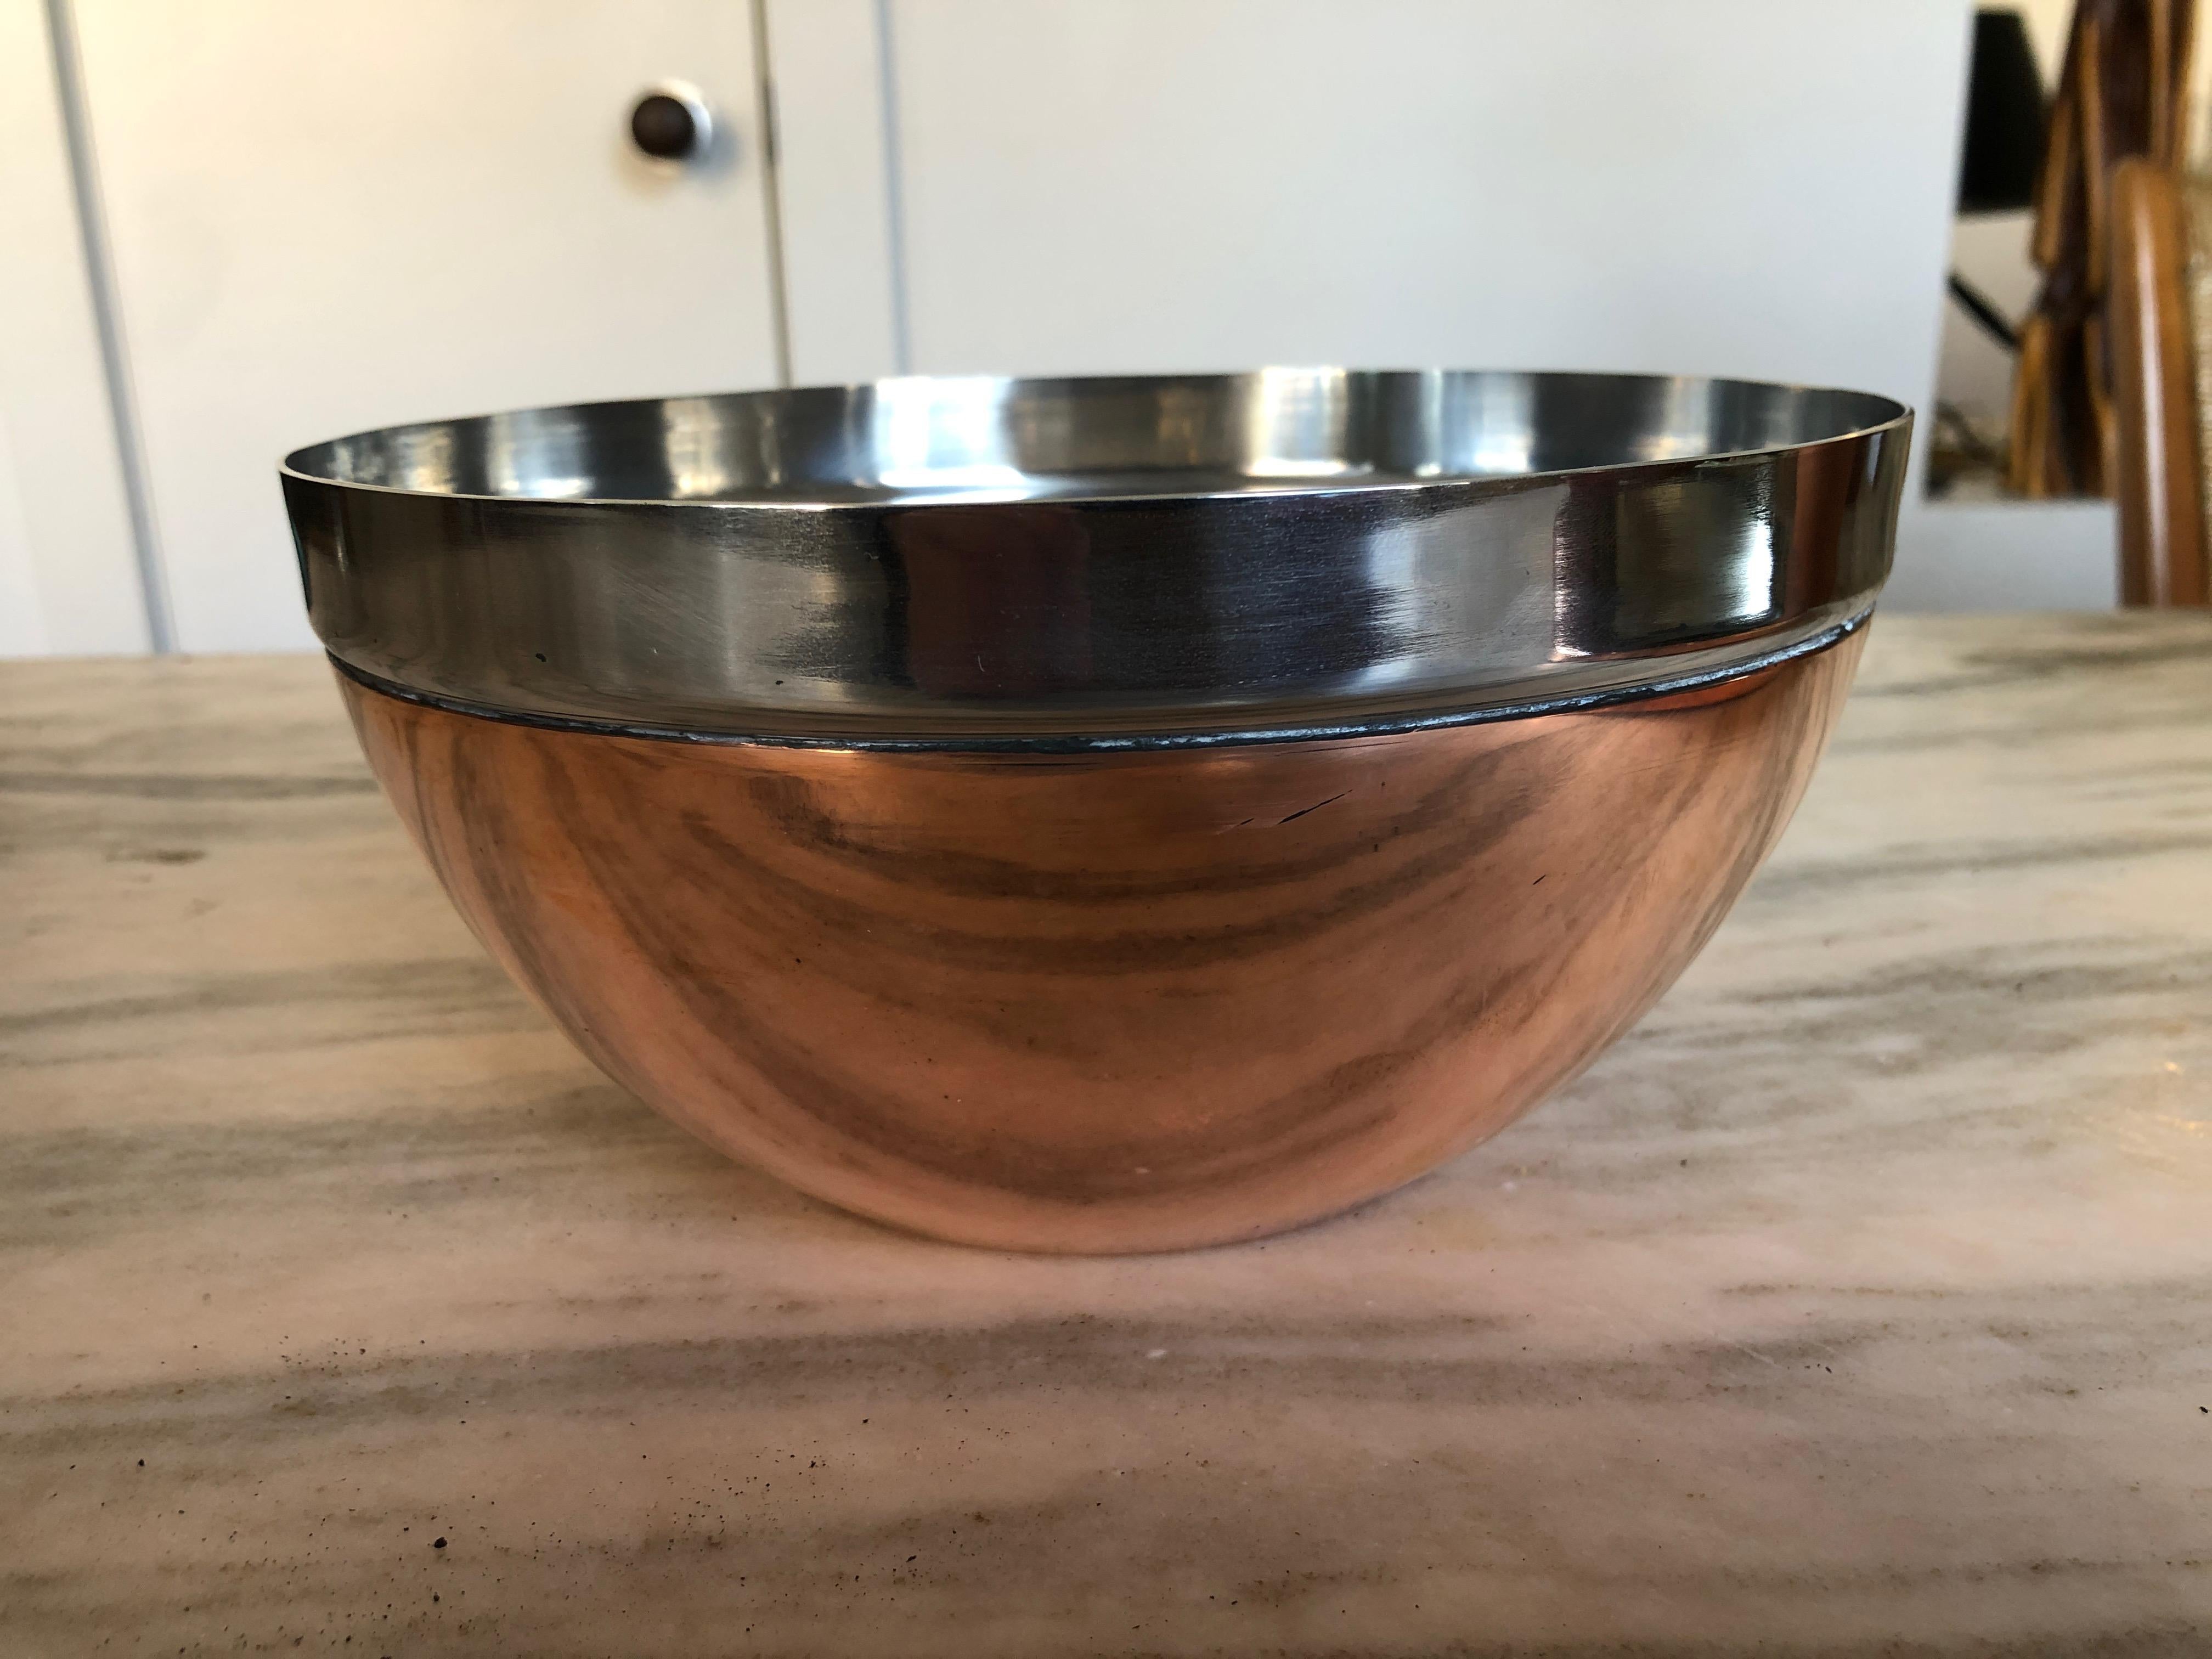 Polished steel and copper, stamped 